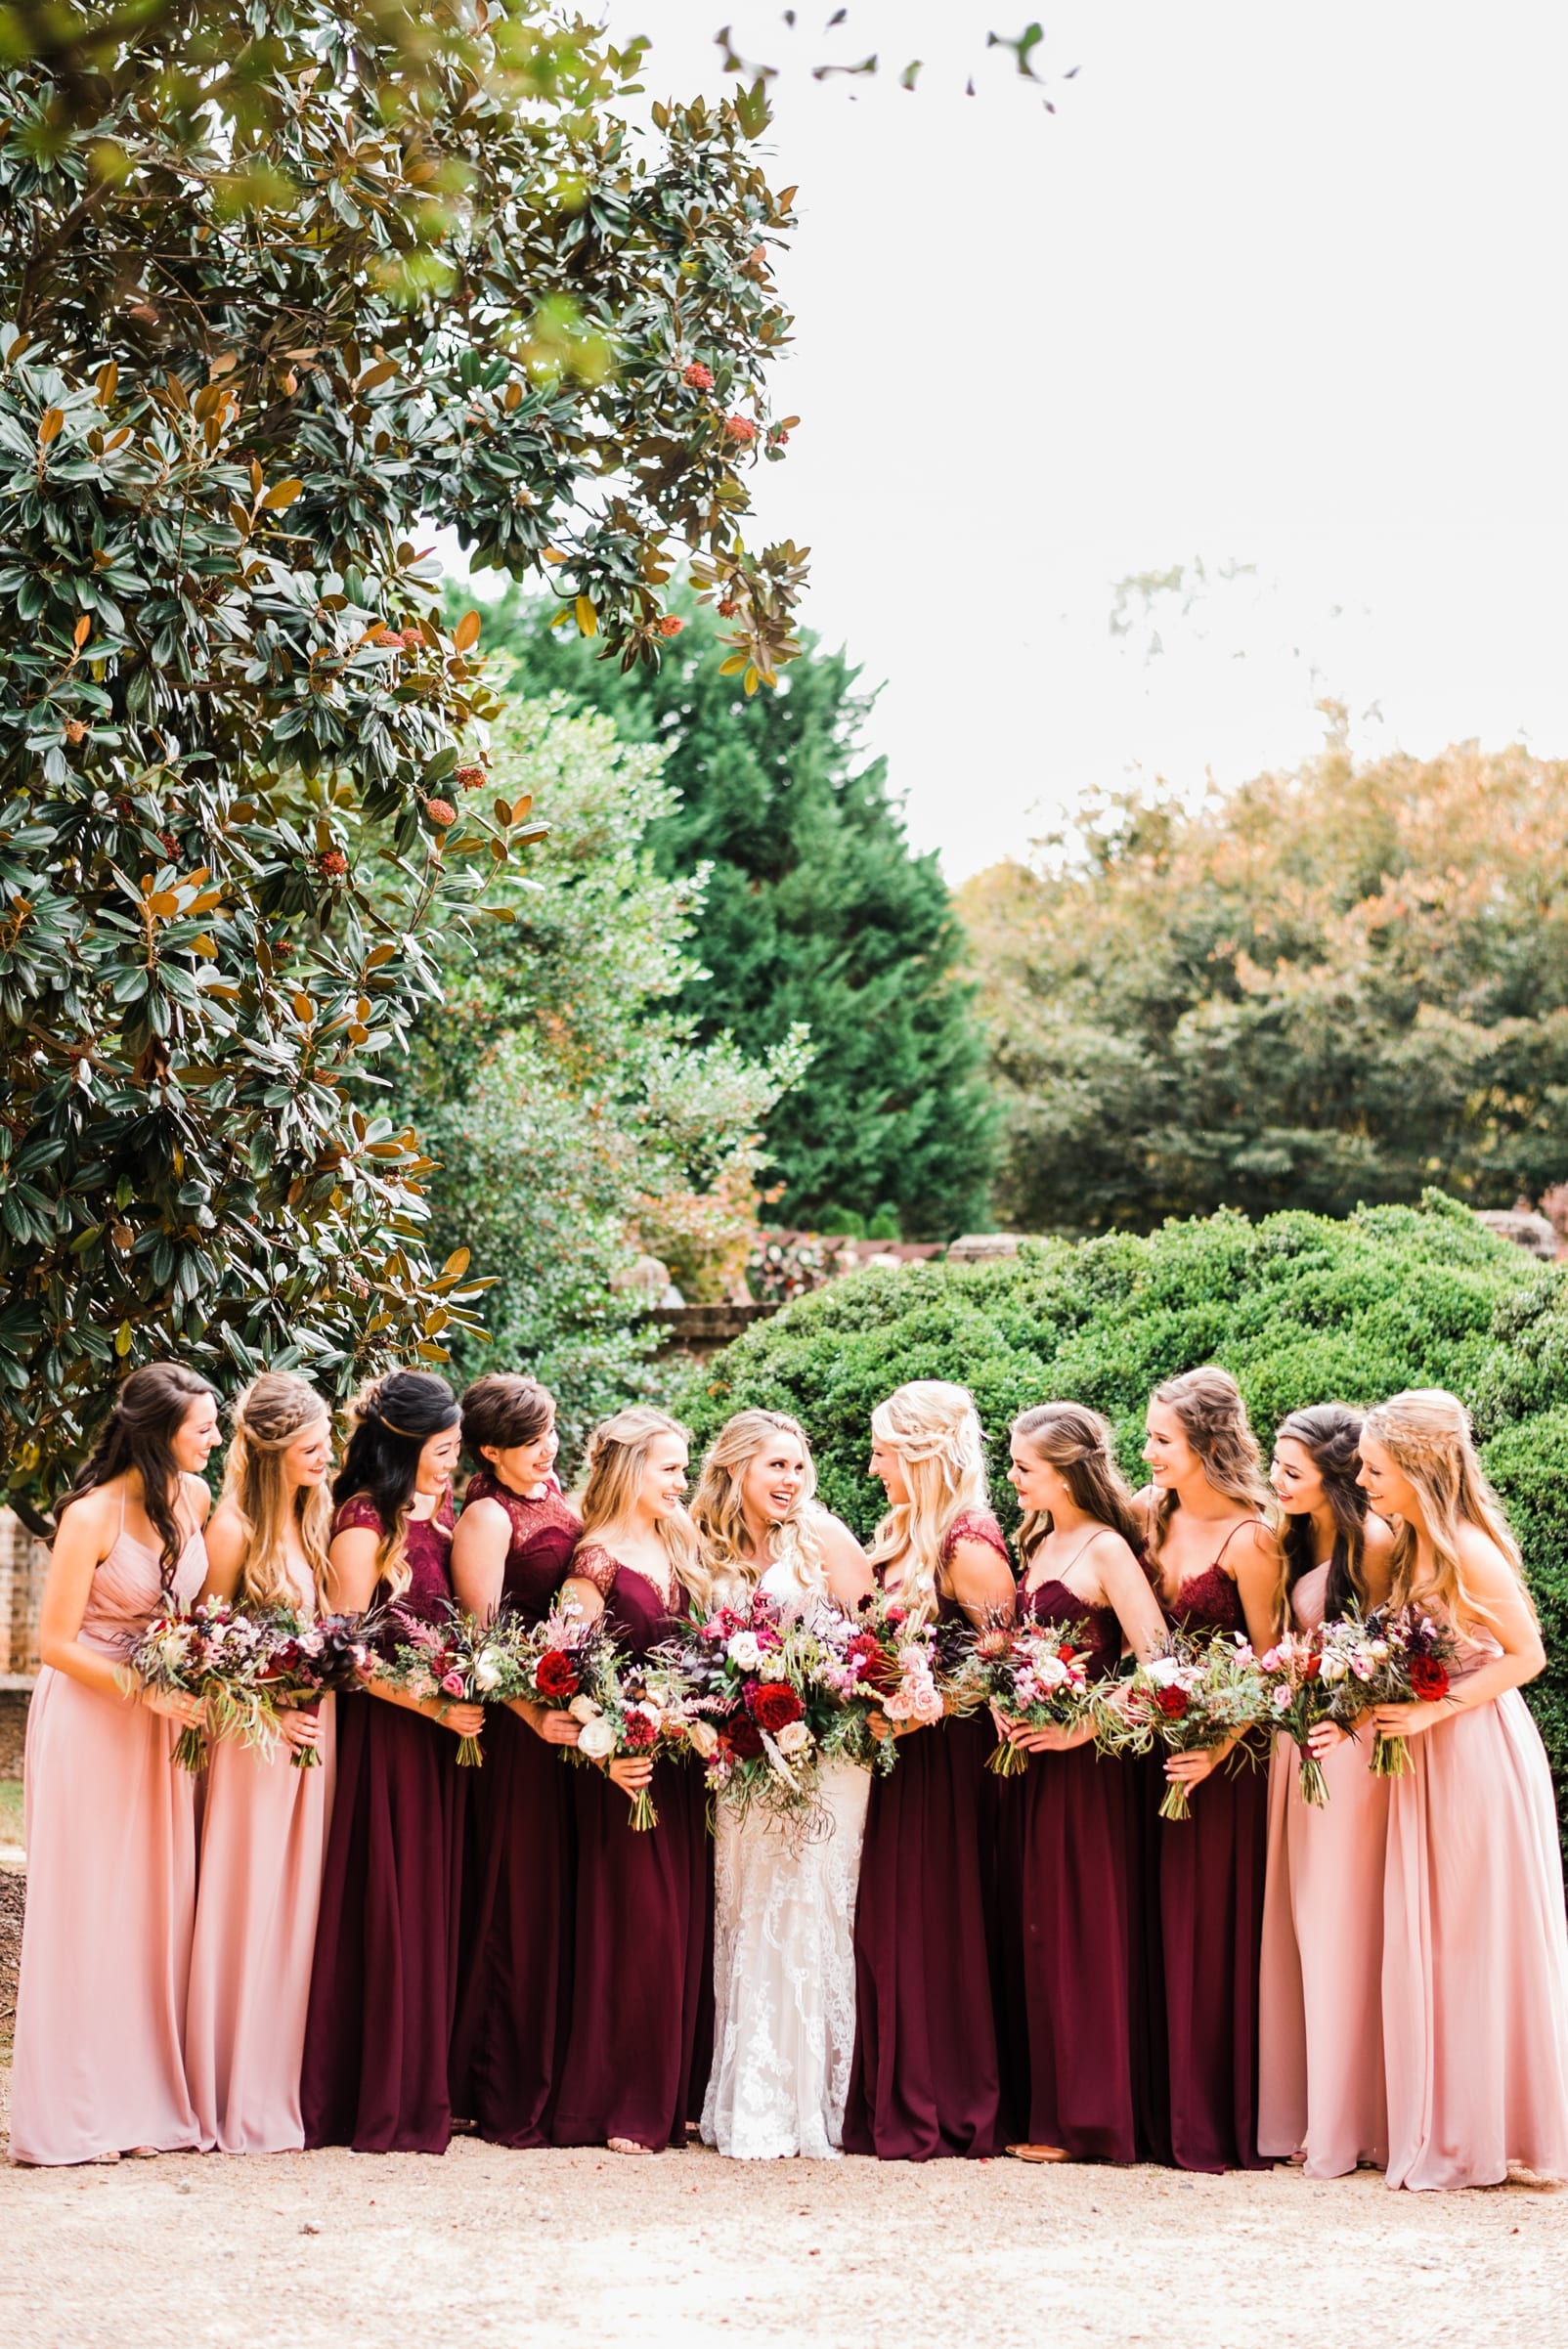 sutherland estate and gardens wedding photographer raleigh wedding photographer burgundy wedding party inspiration photo